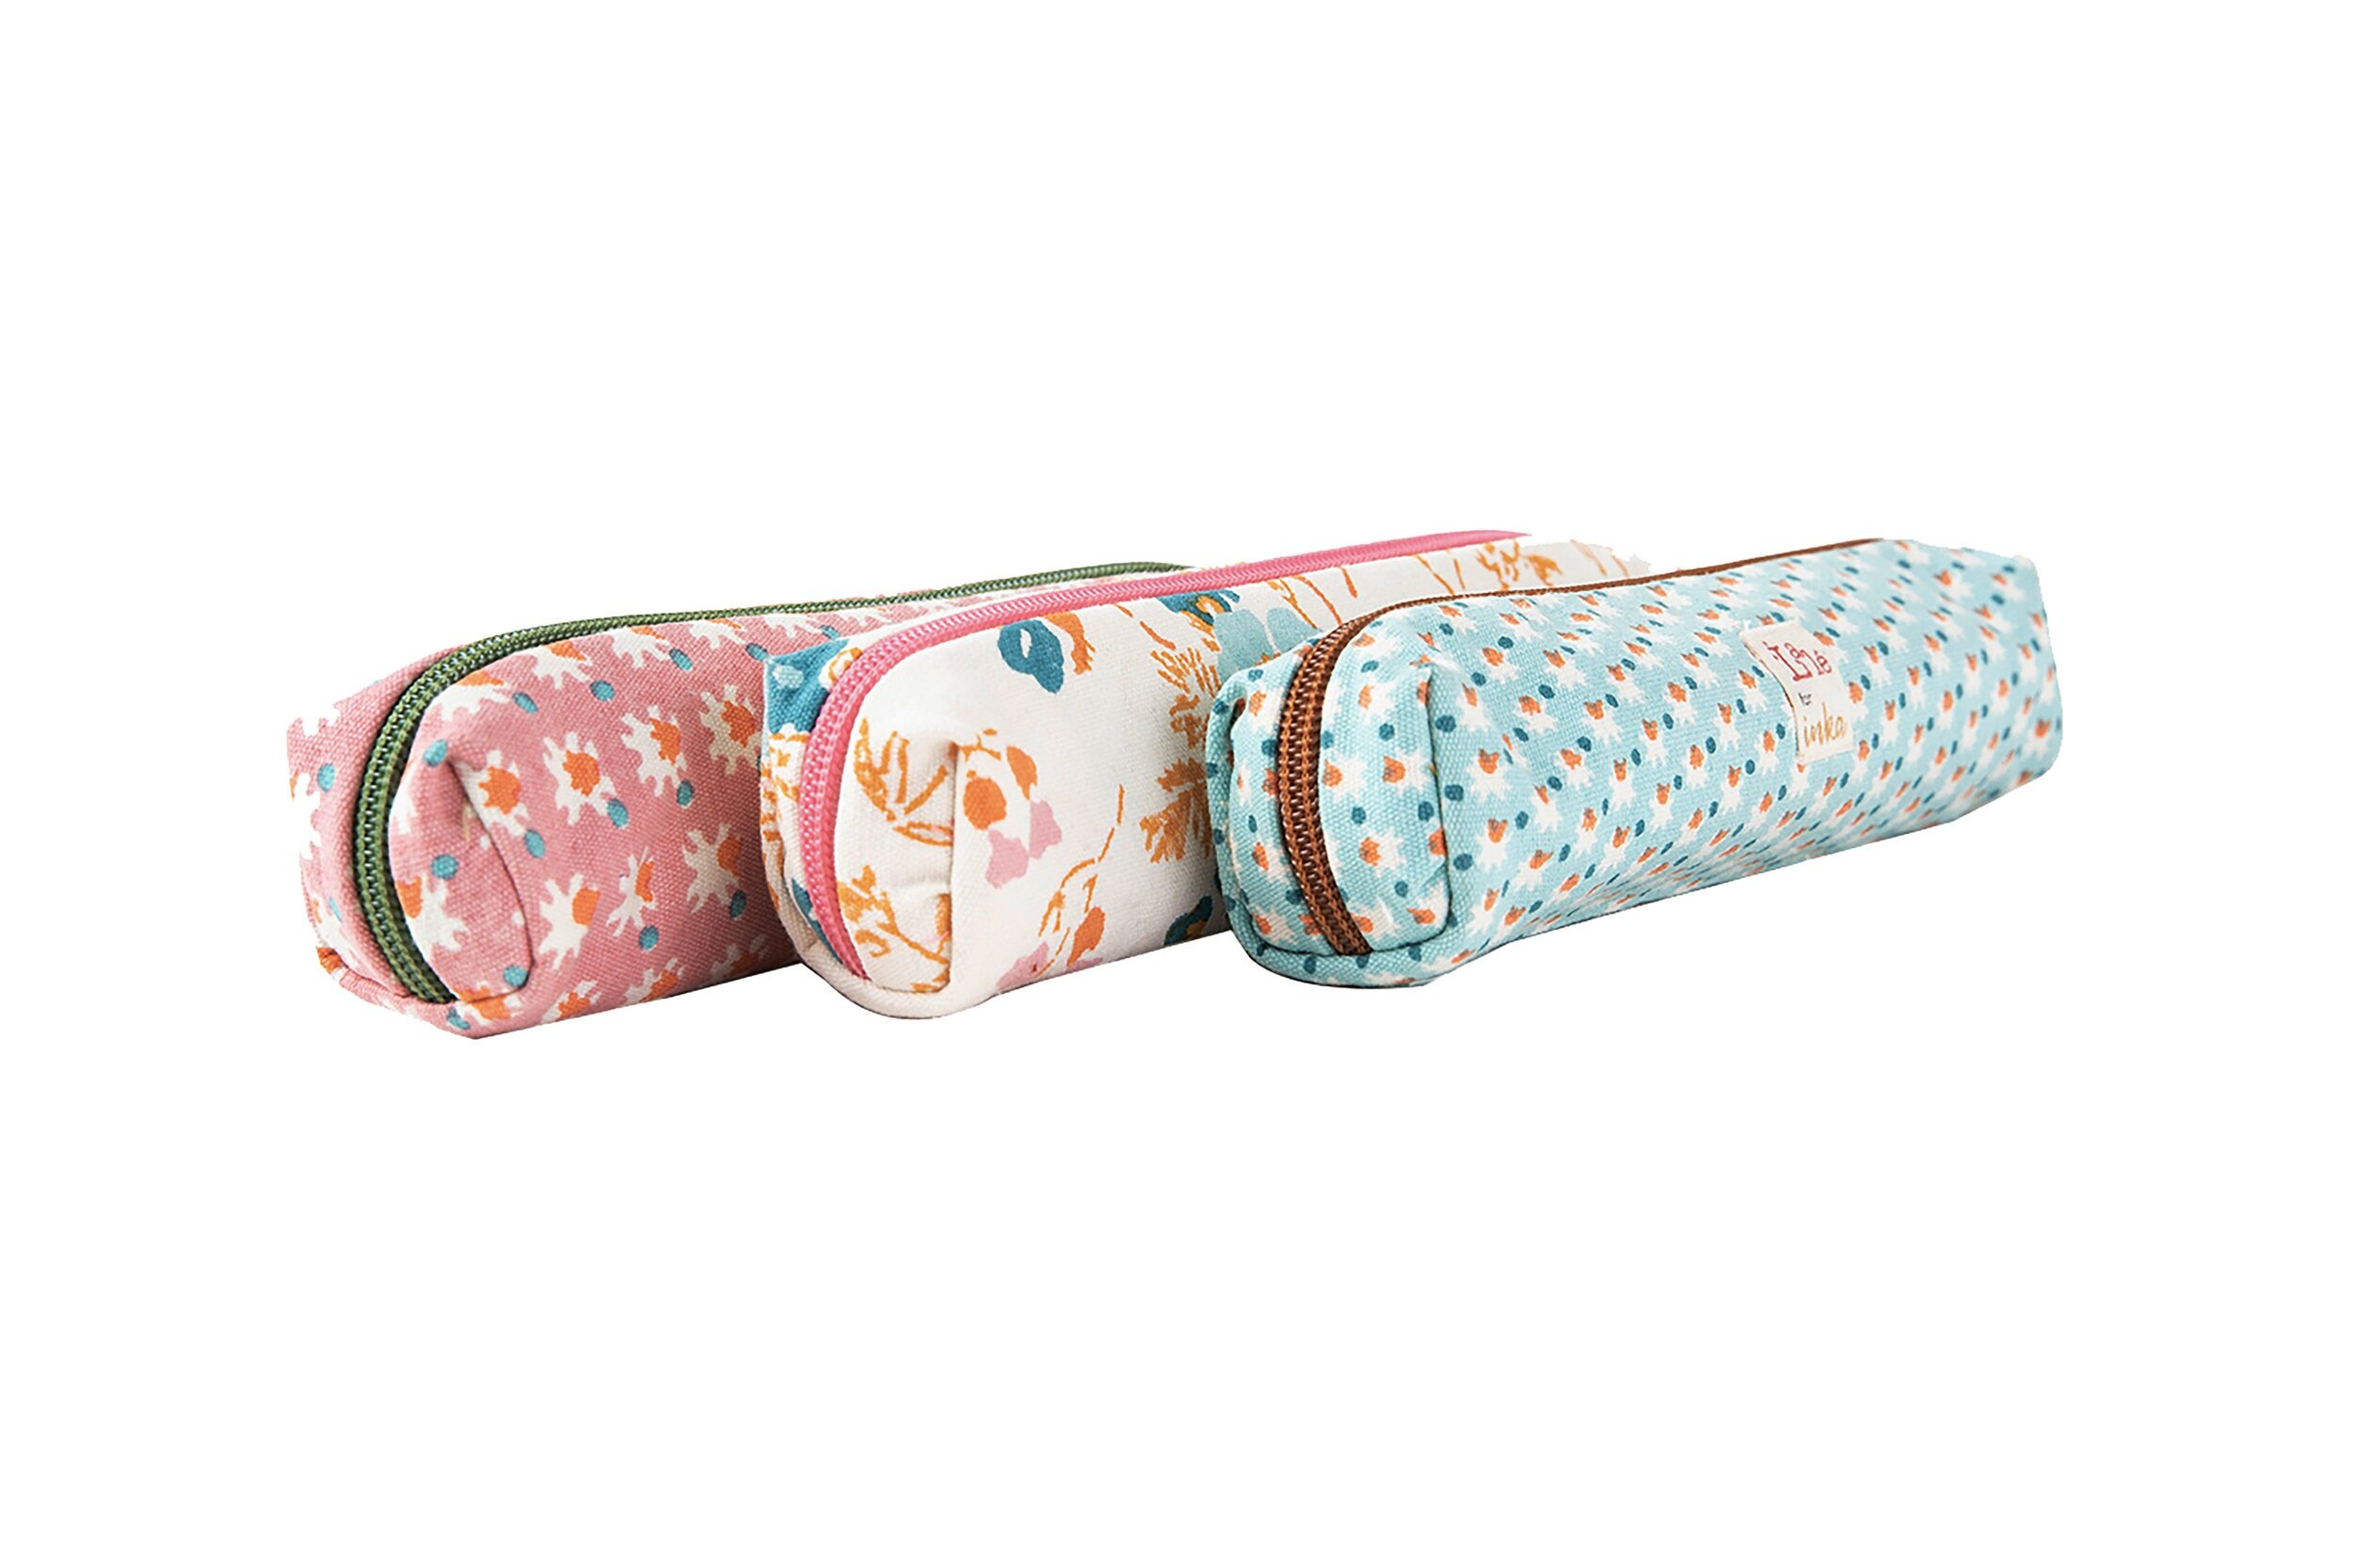   Lalé for Inka pencil cases   